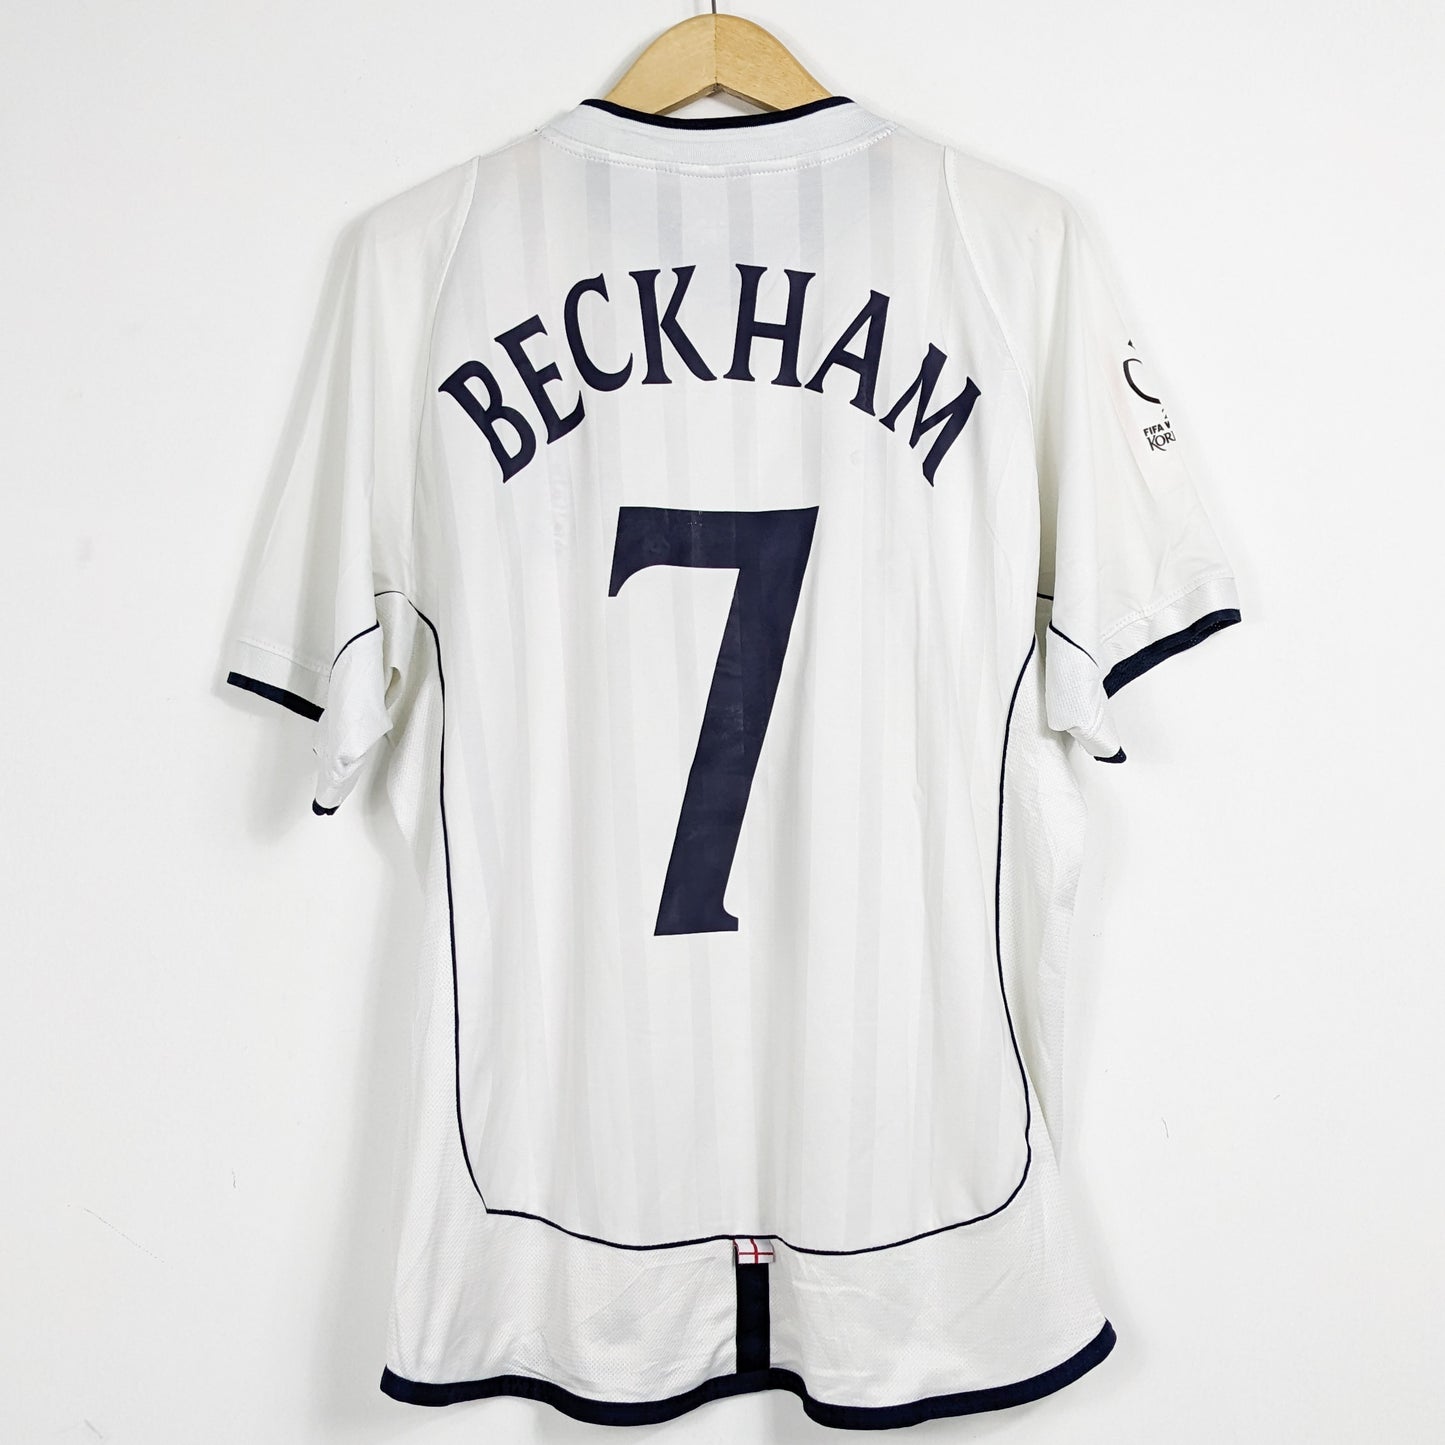 Authentic England 2002 Home - Beckham #7 Size XL (World Cup)